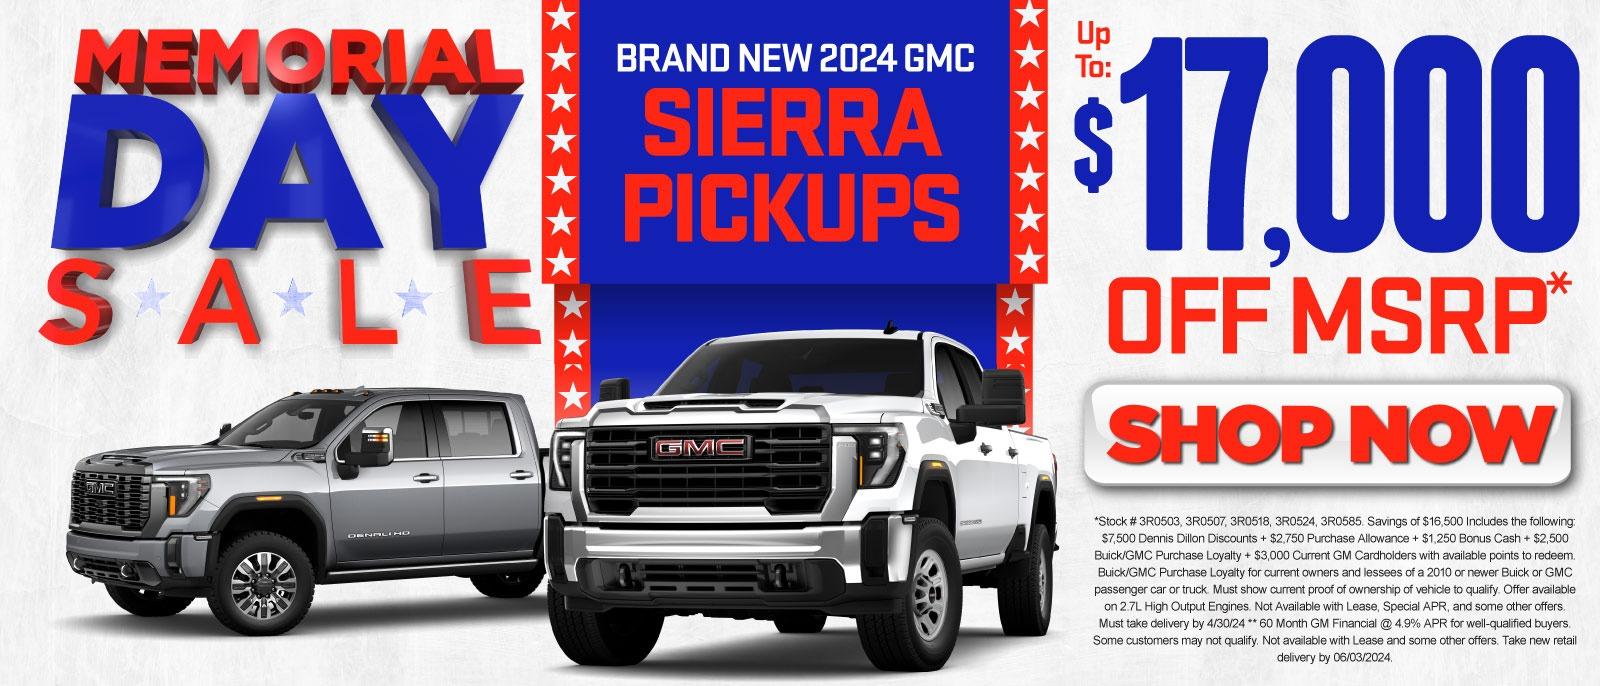 Up to $17,000 off MSRP on 2024 Sierra Pickups